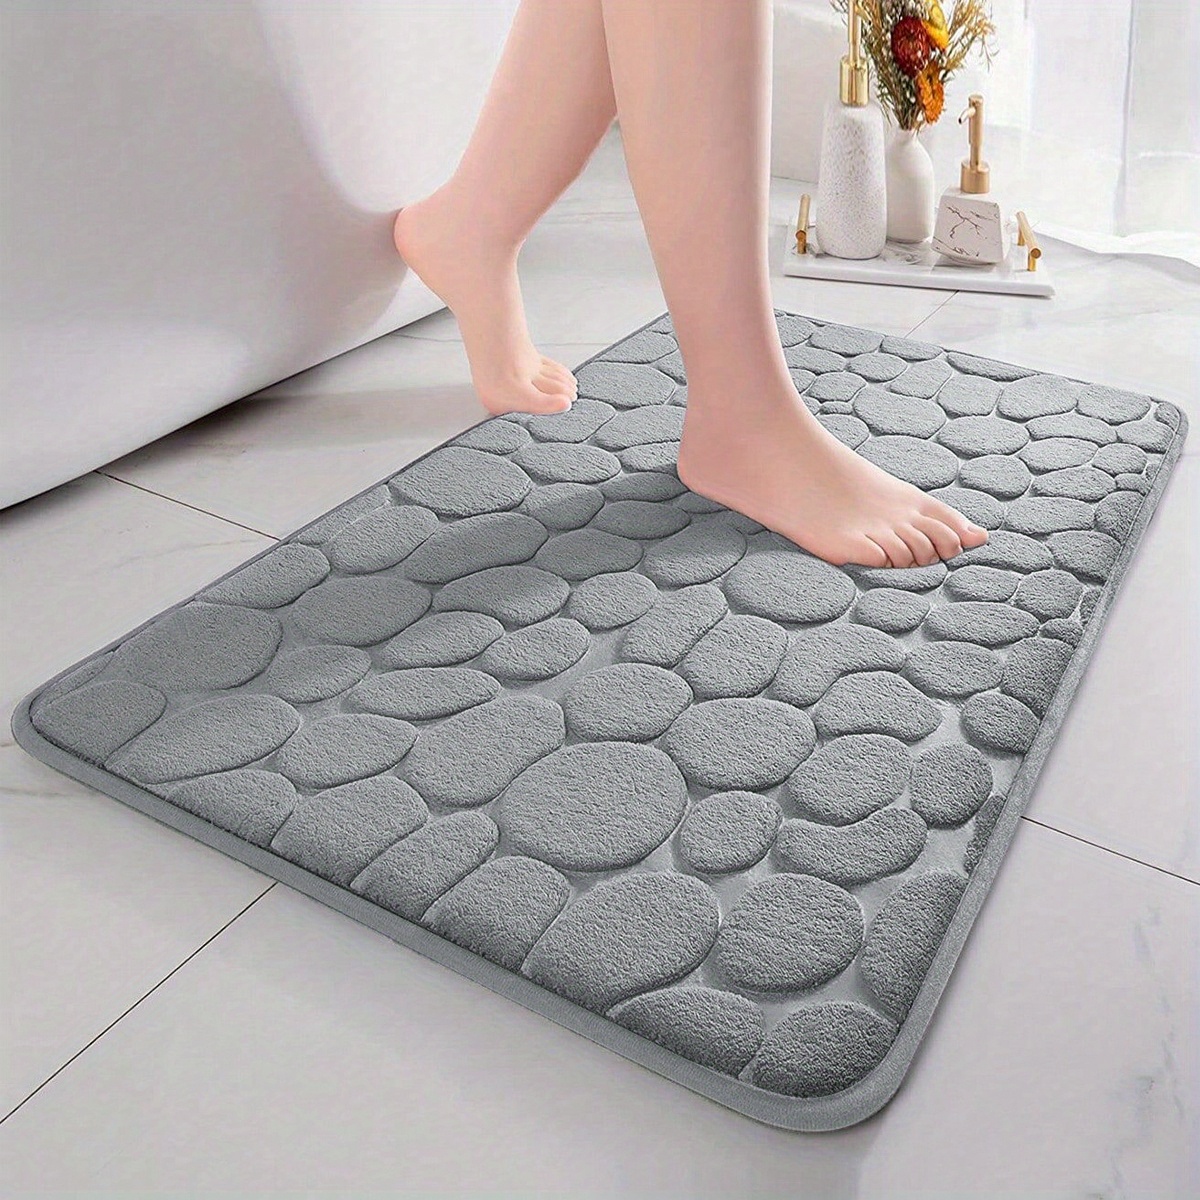 1pc Cobblestone Embossed Bathroom Bath Mat, Memory Foam Pad, Washable Bath  Rugs, Rapid Water Absorbent, Non-Slip, Washable, Thick, Soft And  Comfortable Carpet For Shower Room